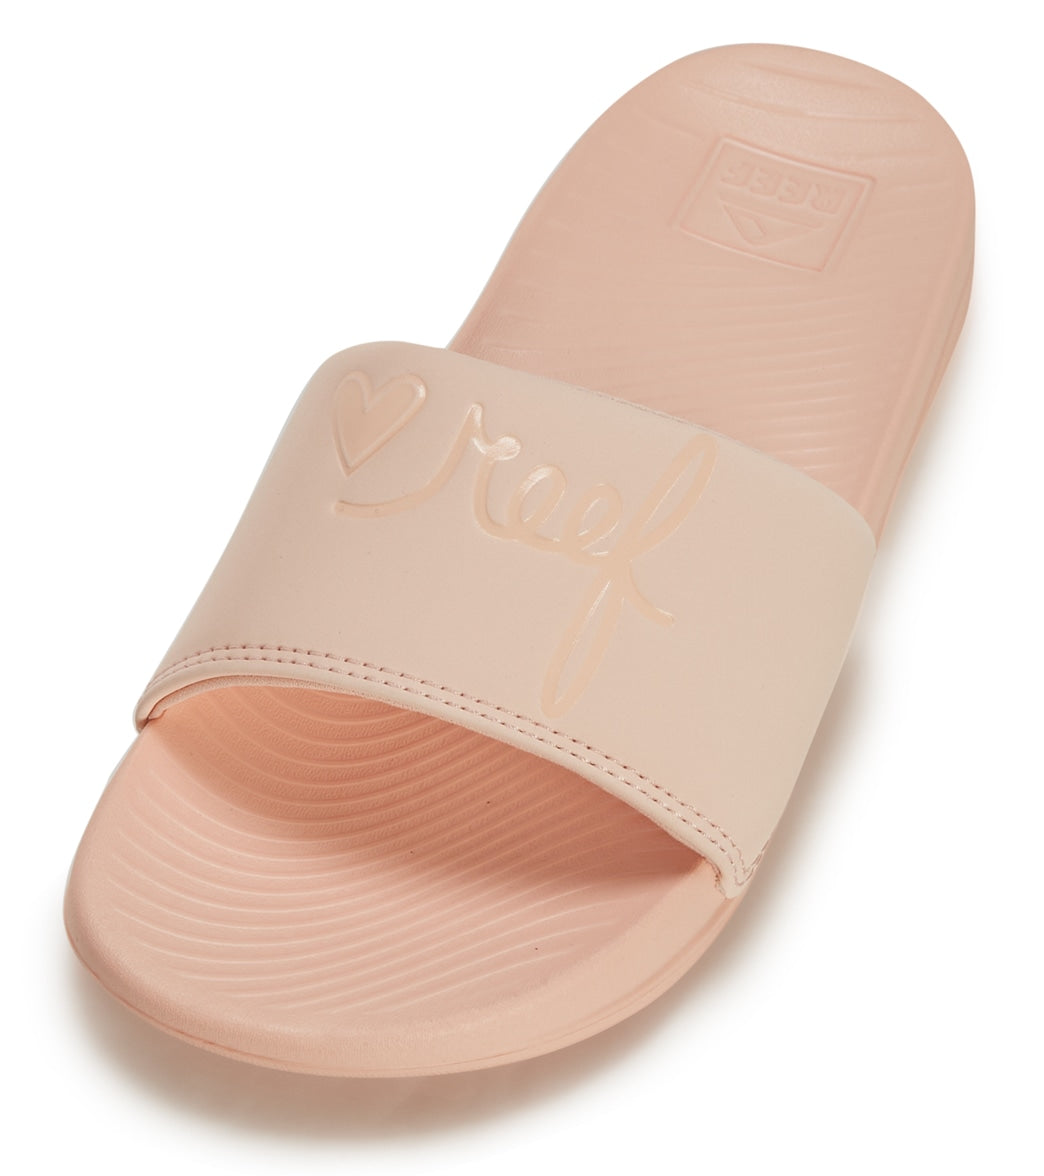 Reef Women's Reef One Slide Sandal at SwimOutlet.com